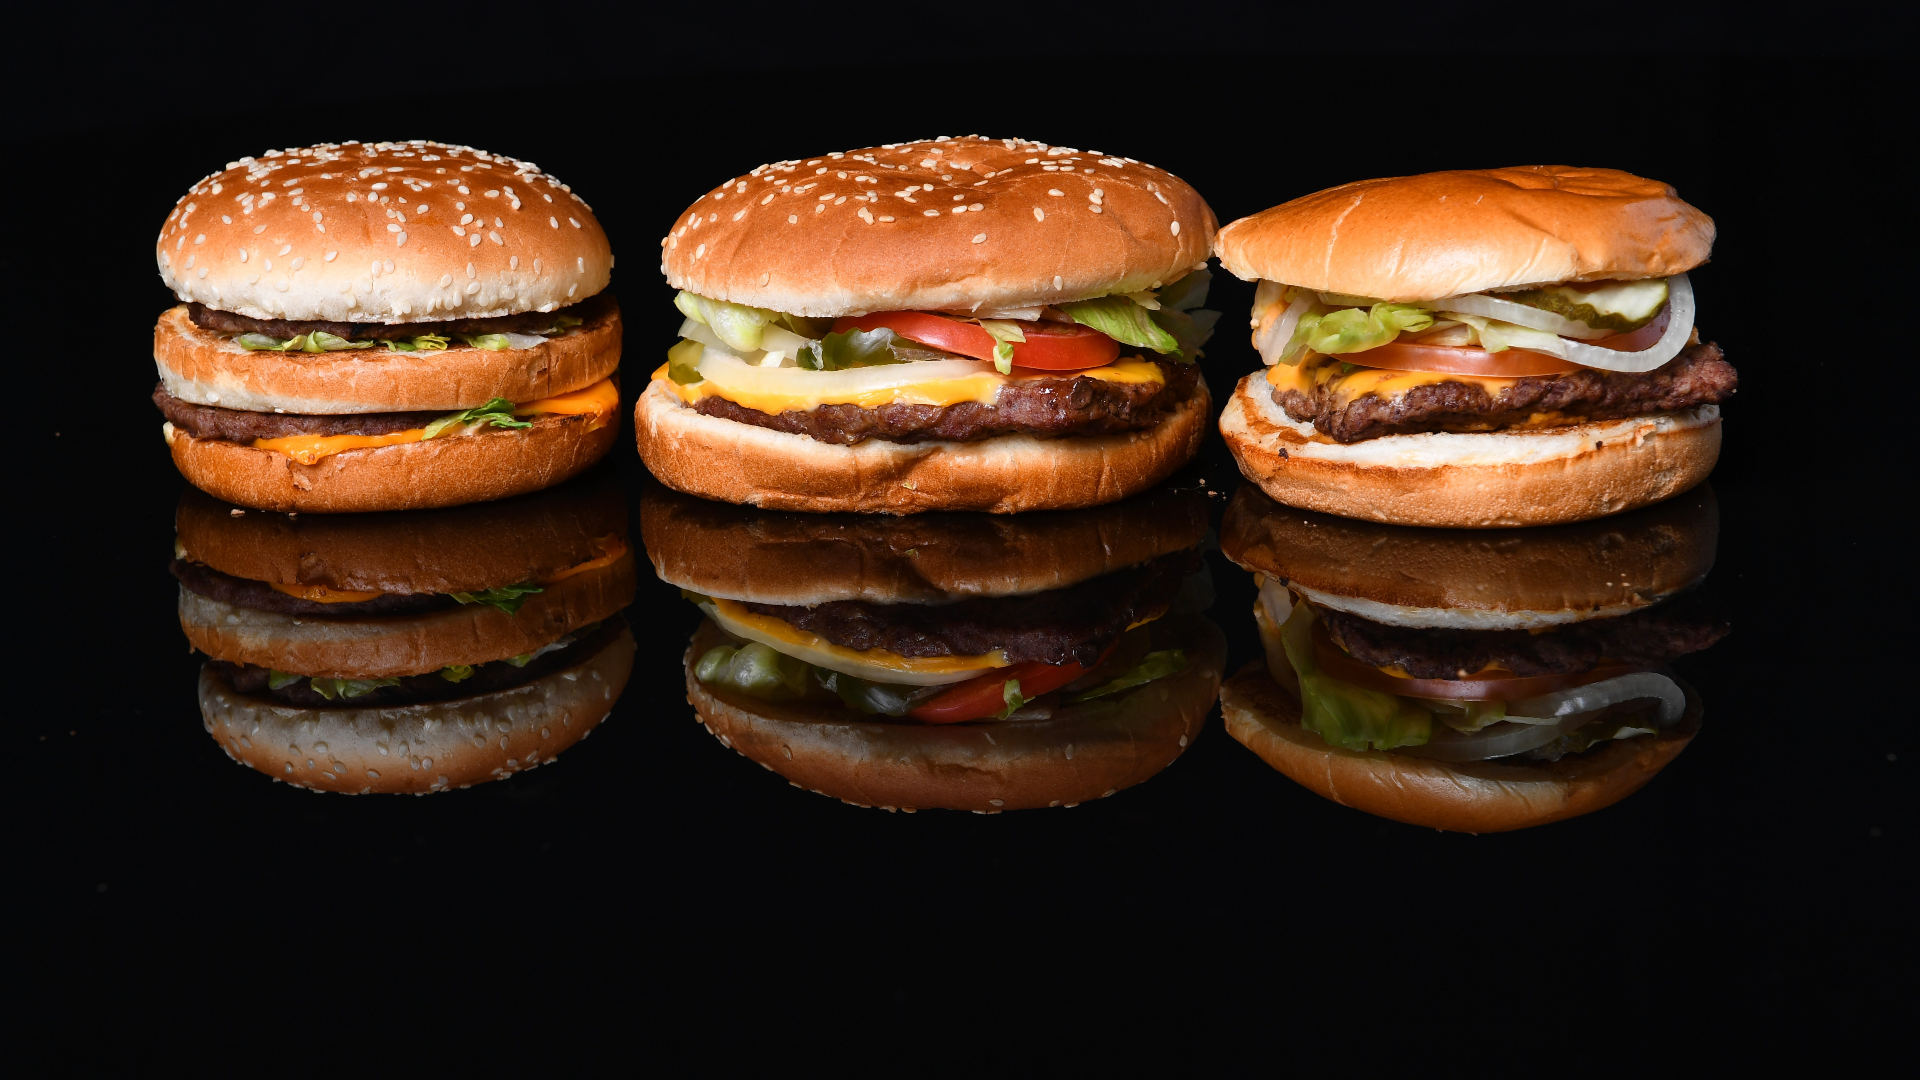 I tried the Big Mac, Whopper and Dave's Single. They share the